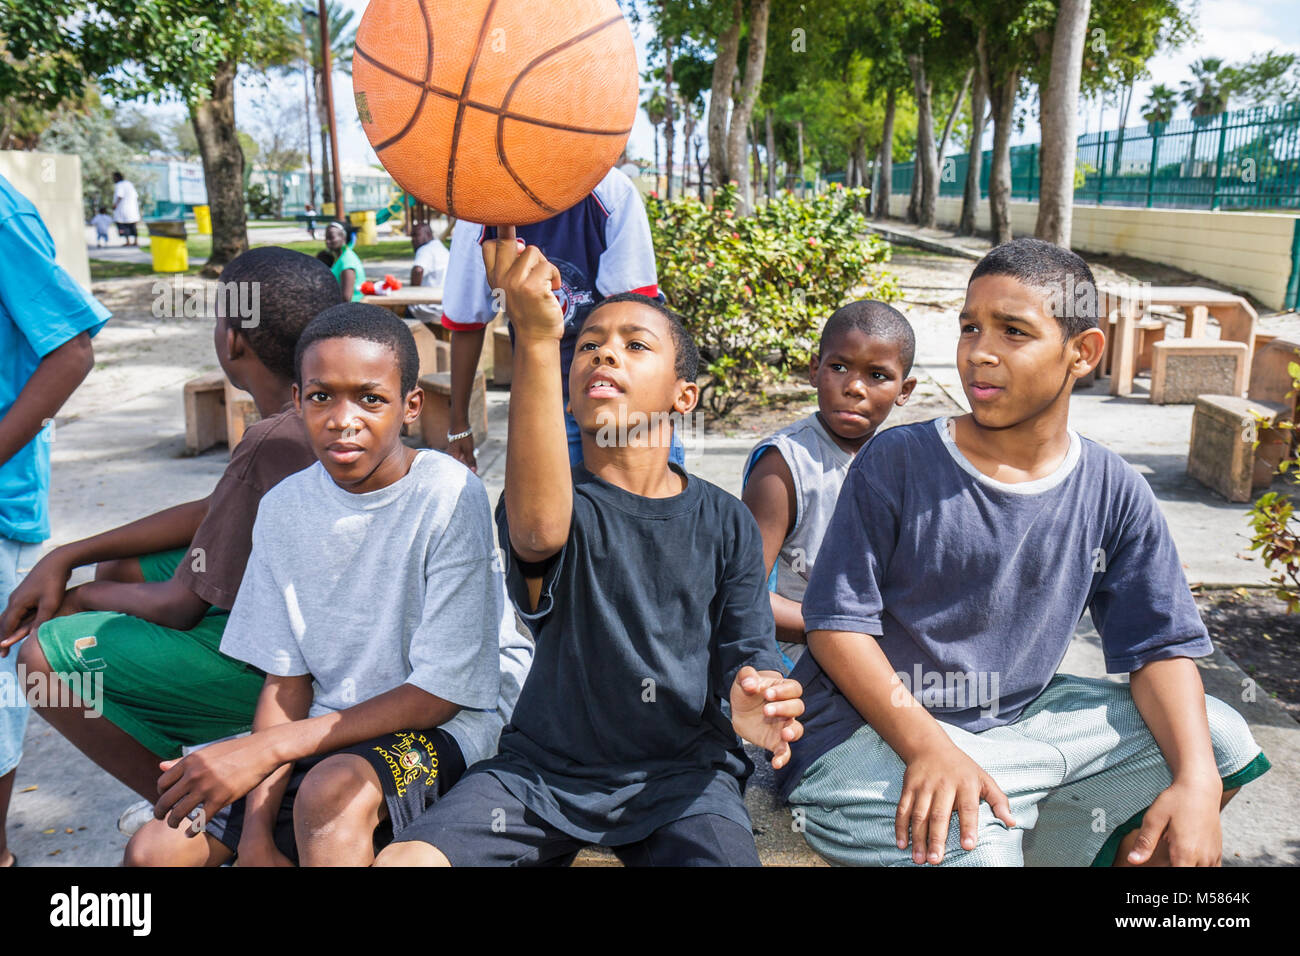 Miami Florida,Liberty City,African Square Park,inner city,low income,poverty,Black boy boys,male kid kids child children youngster,group[,park,playgro Stock Photo